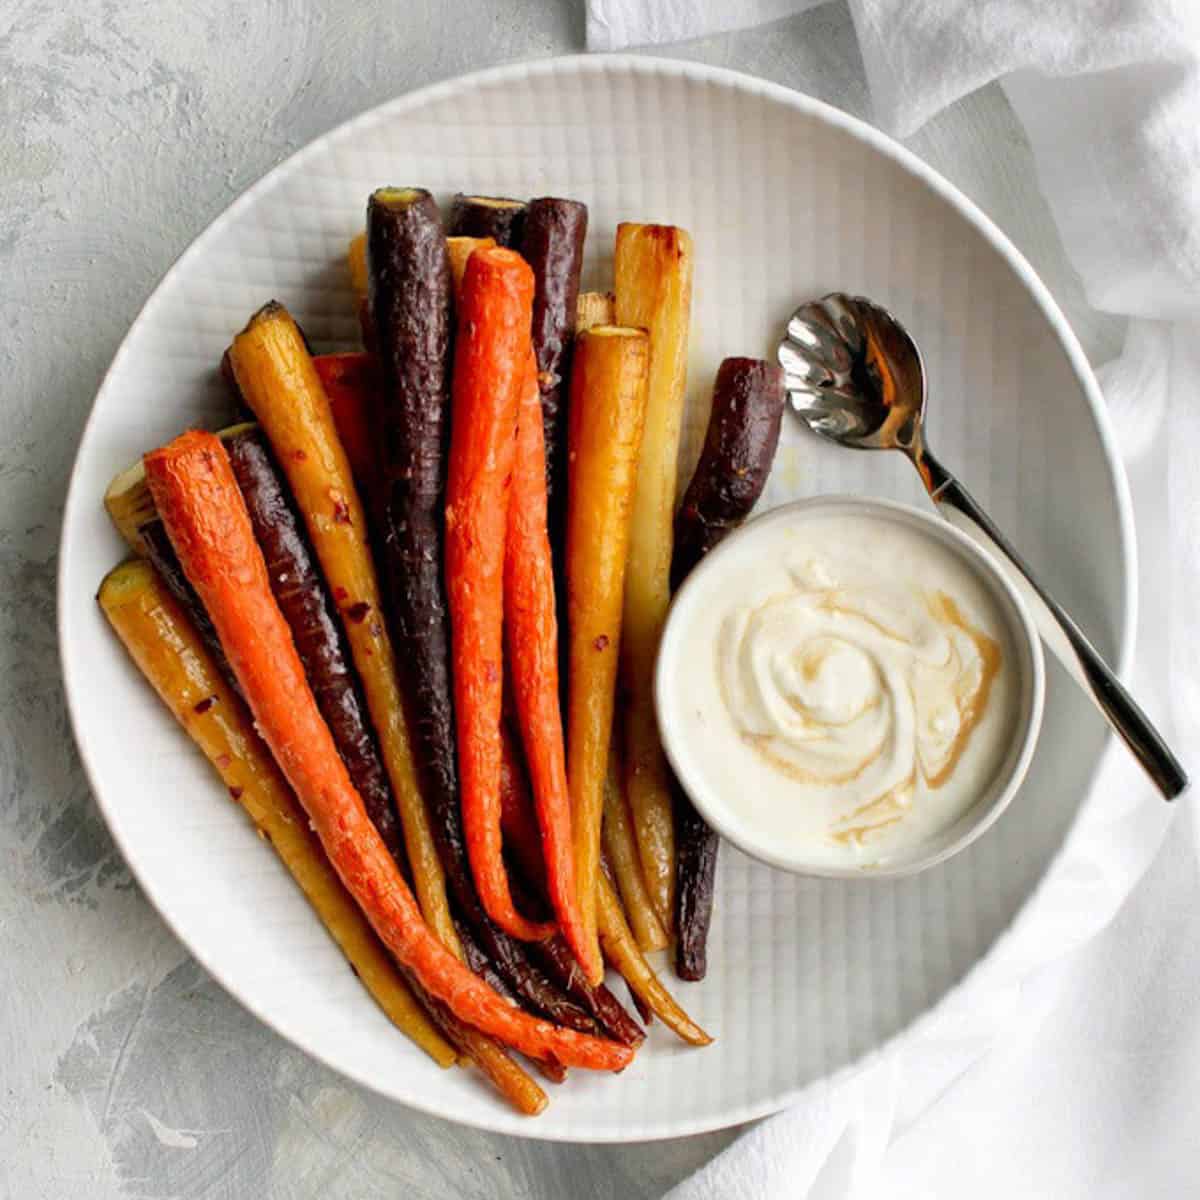 roasted colorful carrots on large white tray next to tahini sauce in small bowl on the tray.